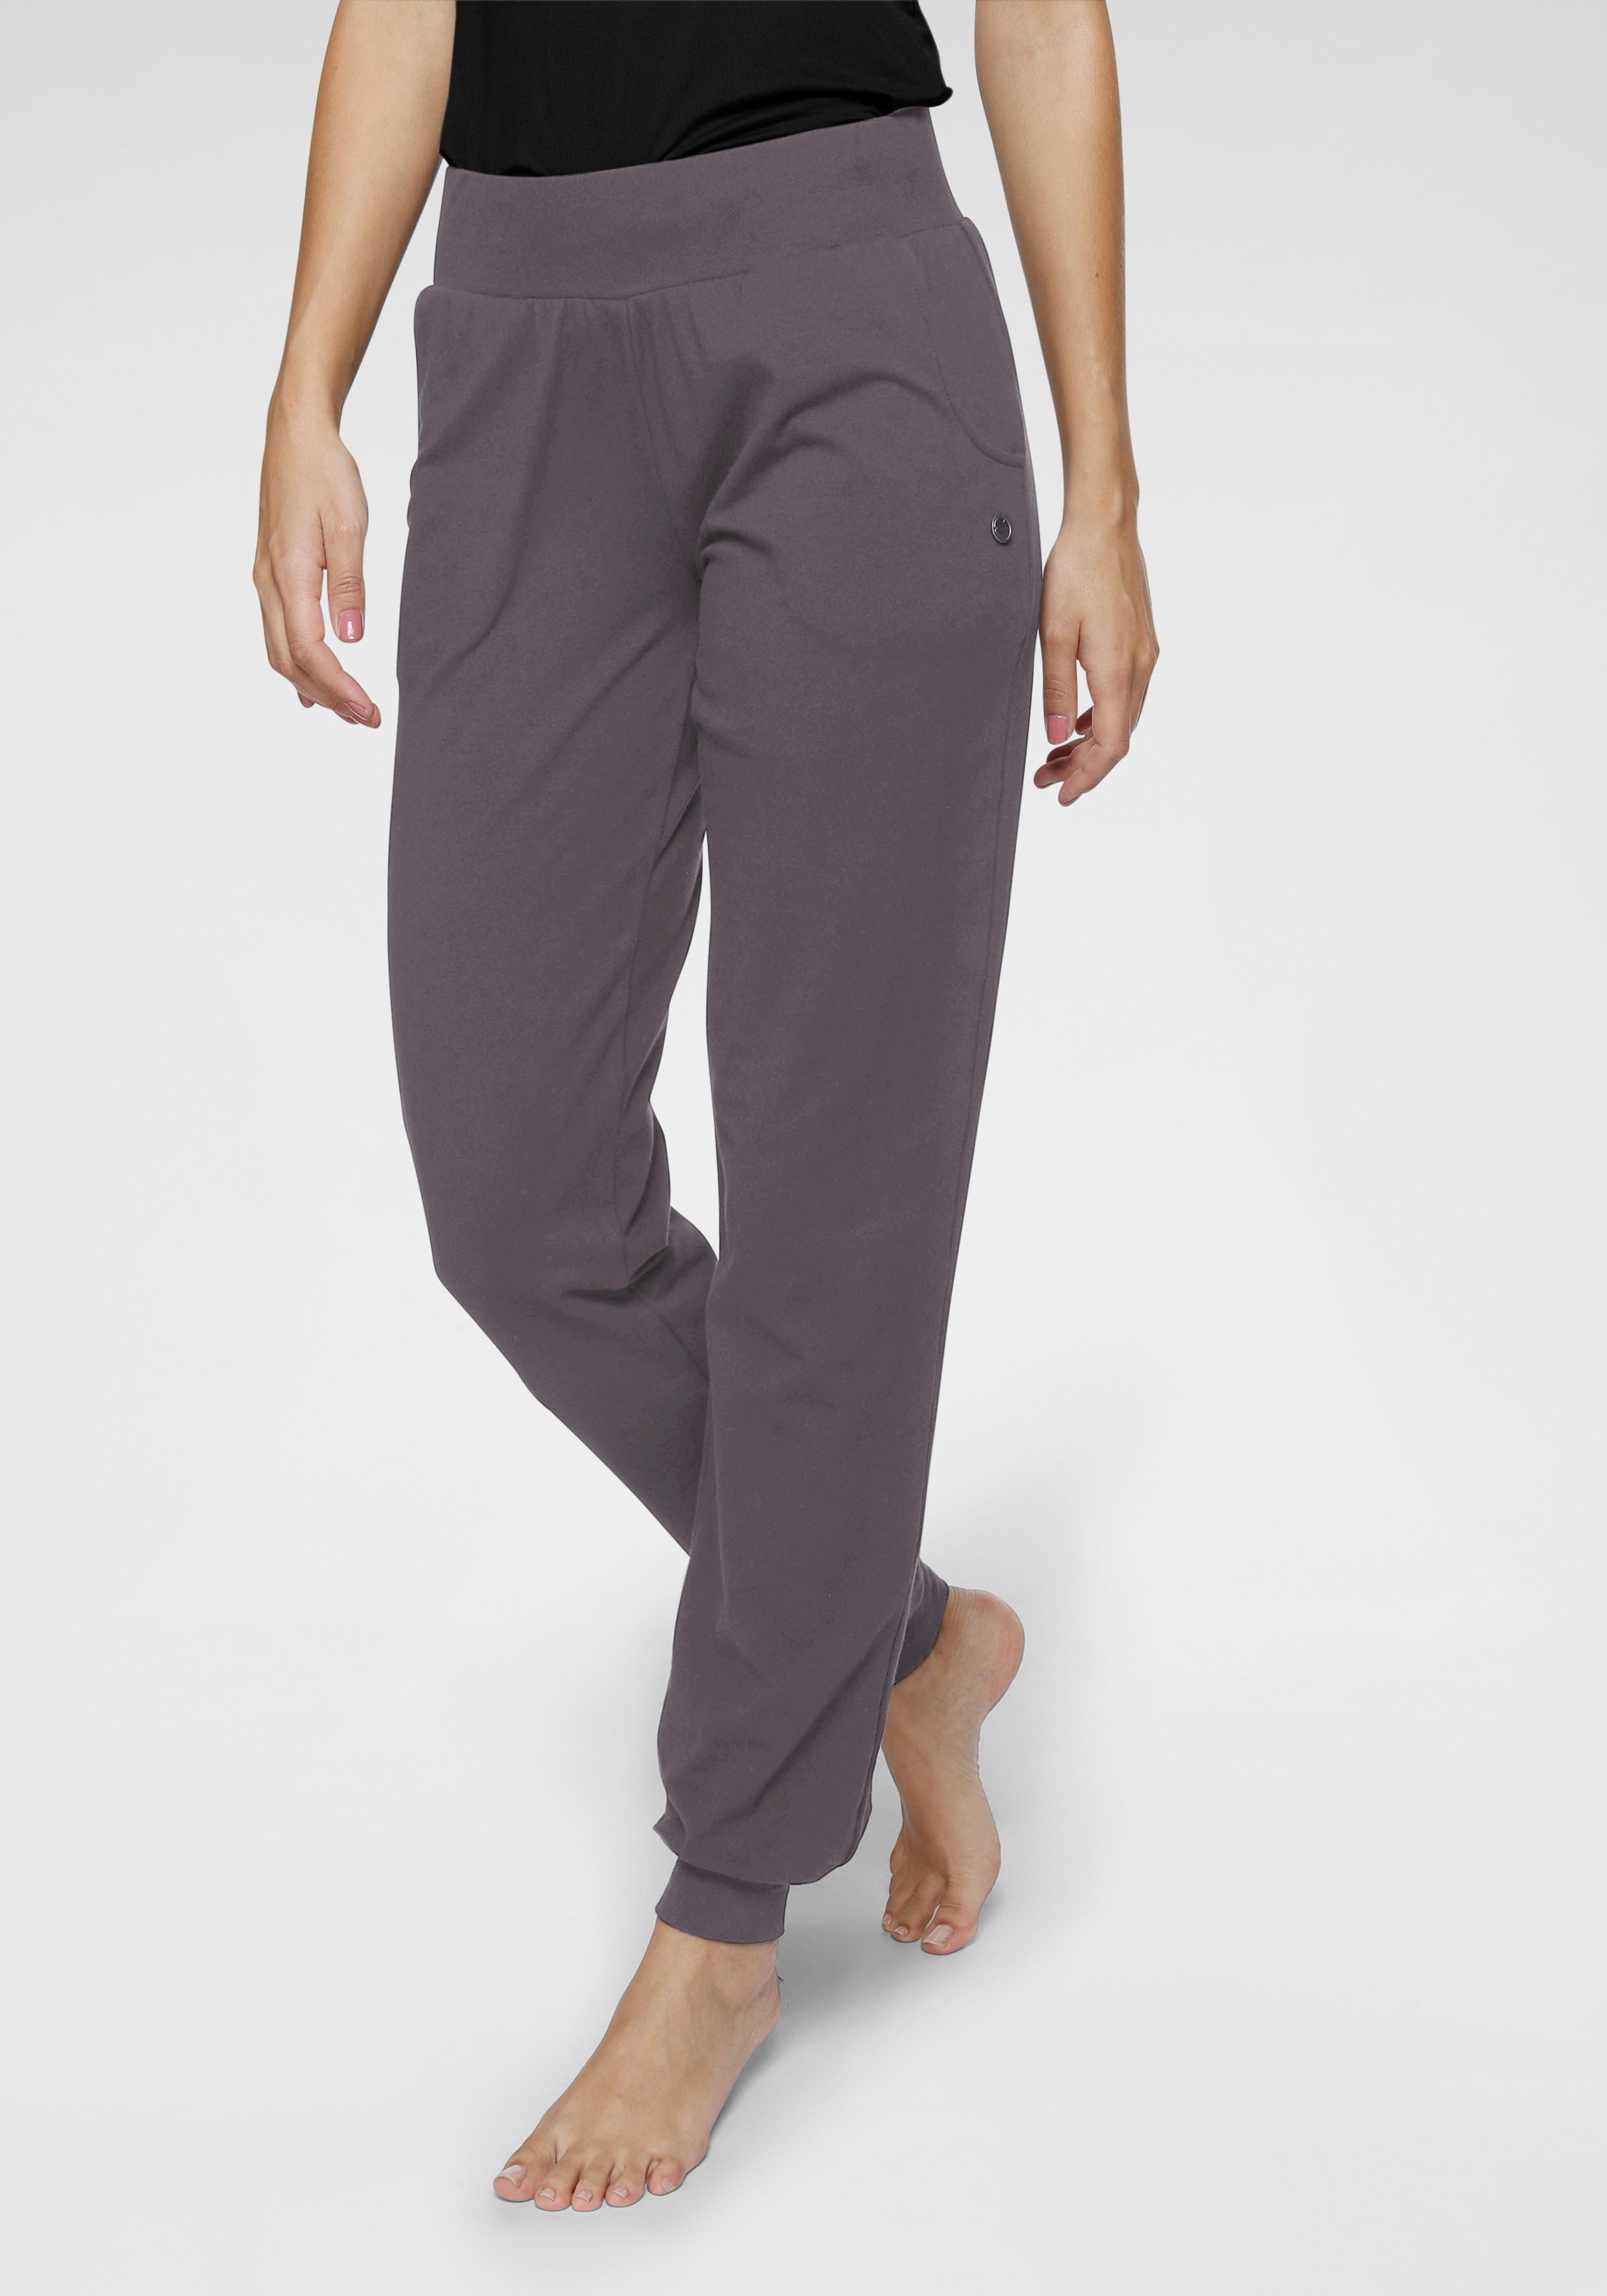 Soulwear - Yoga & Relax Pants - Loose Fit